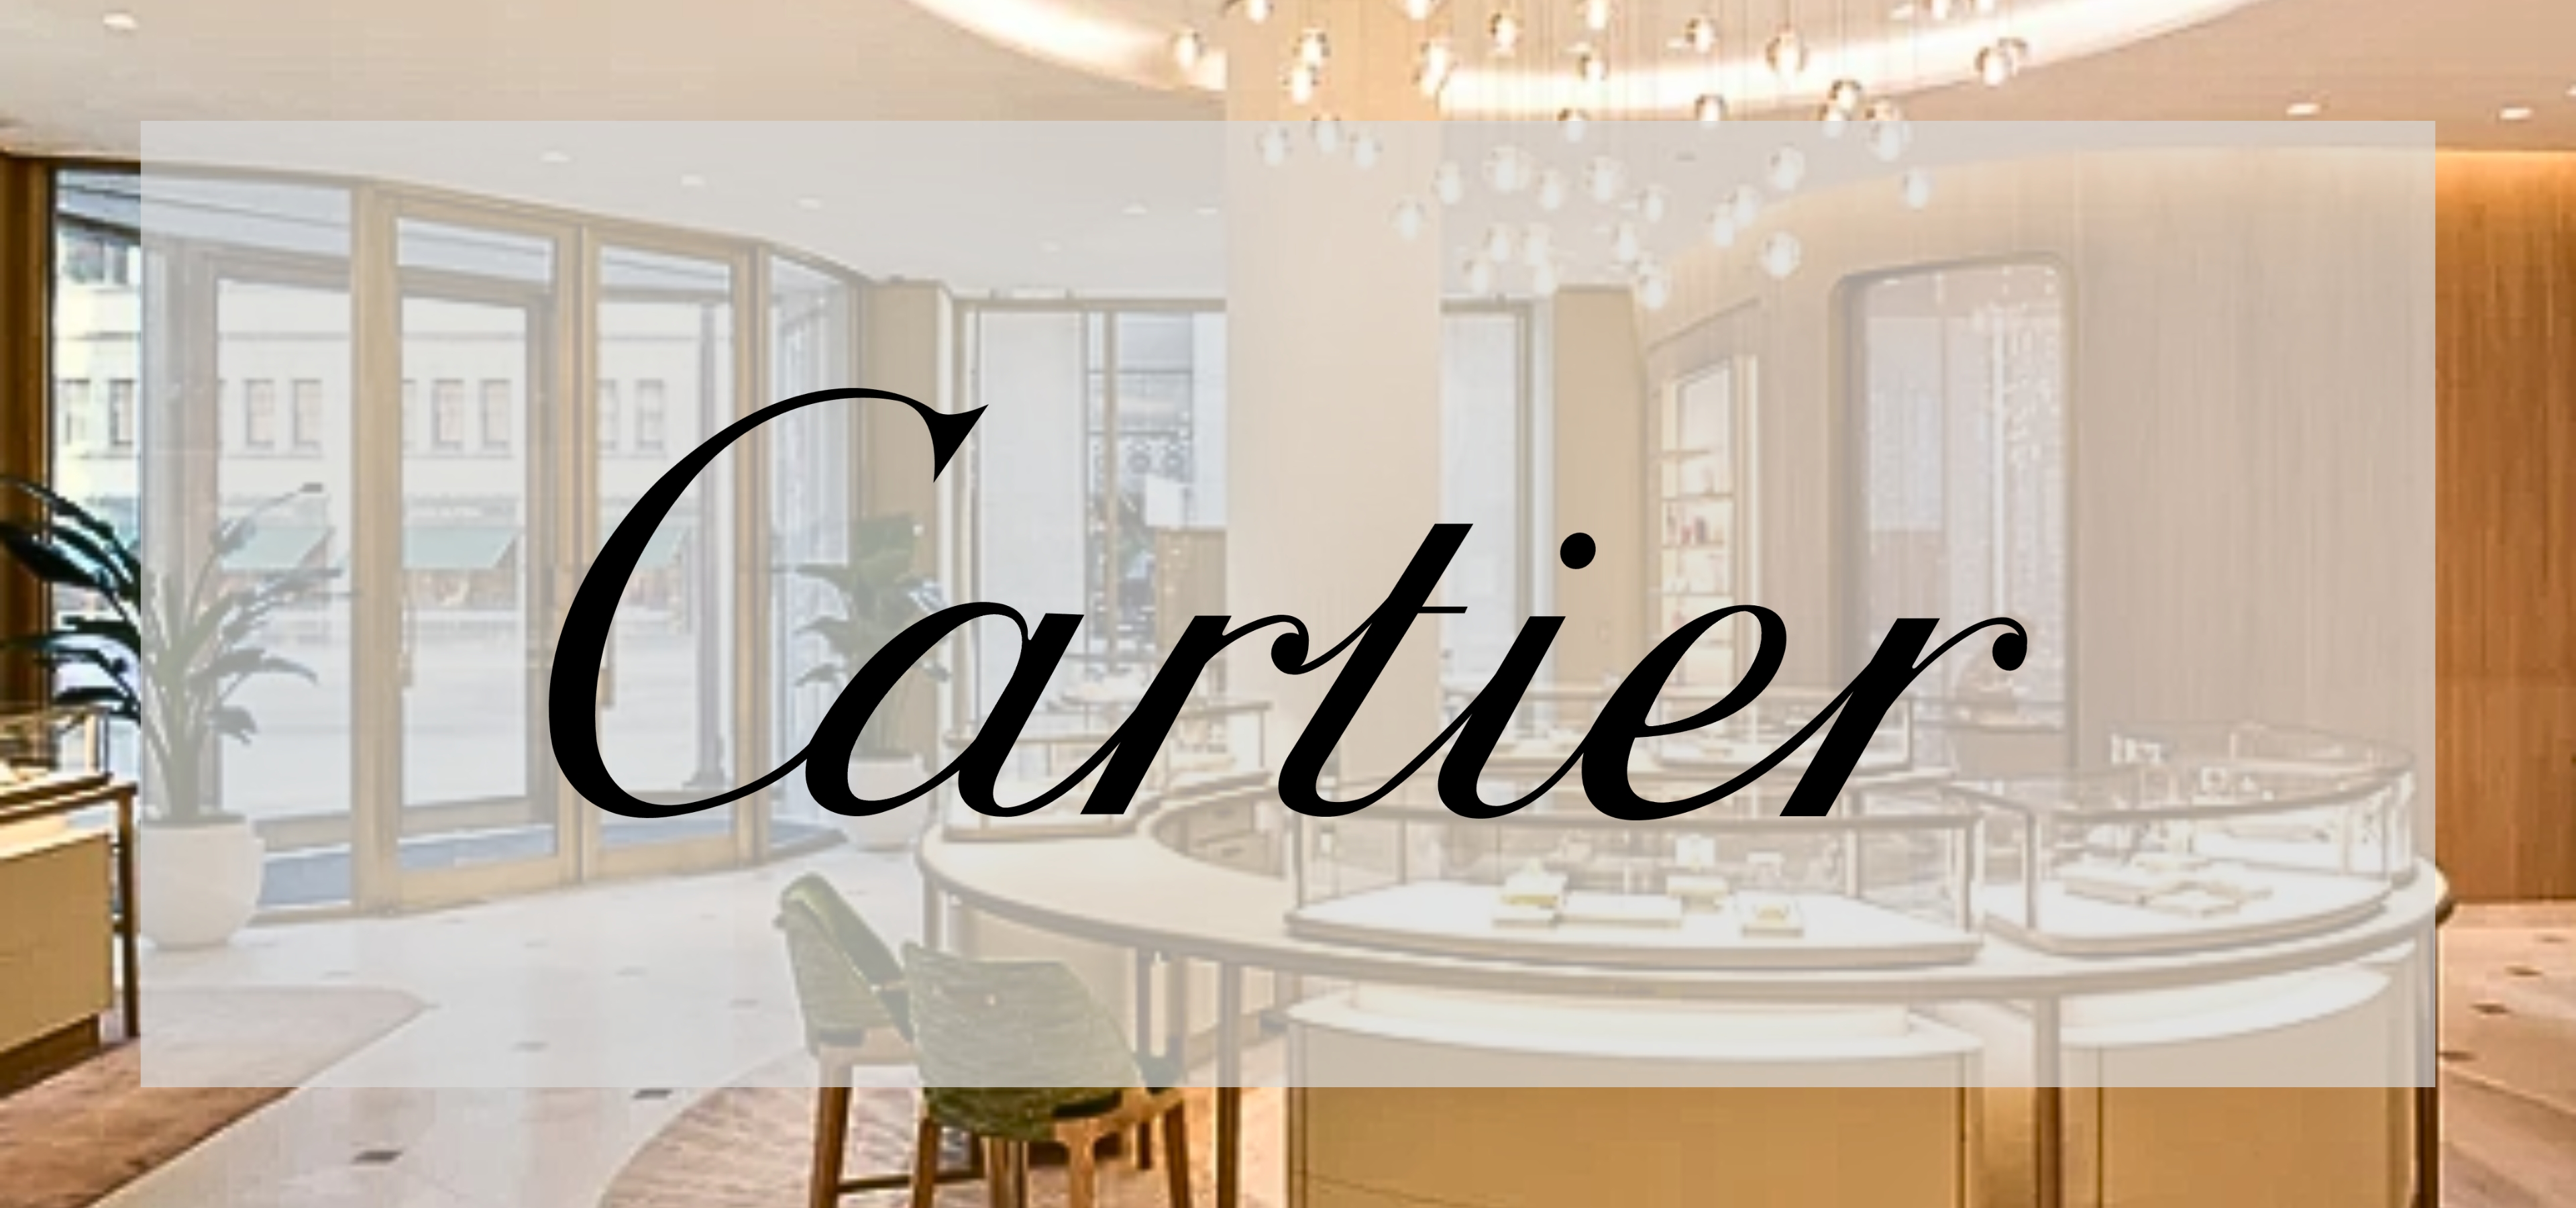 Cartier Project Image